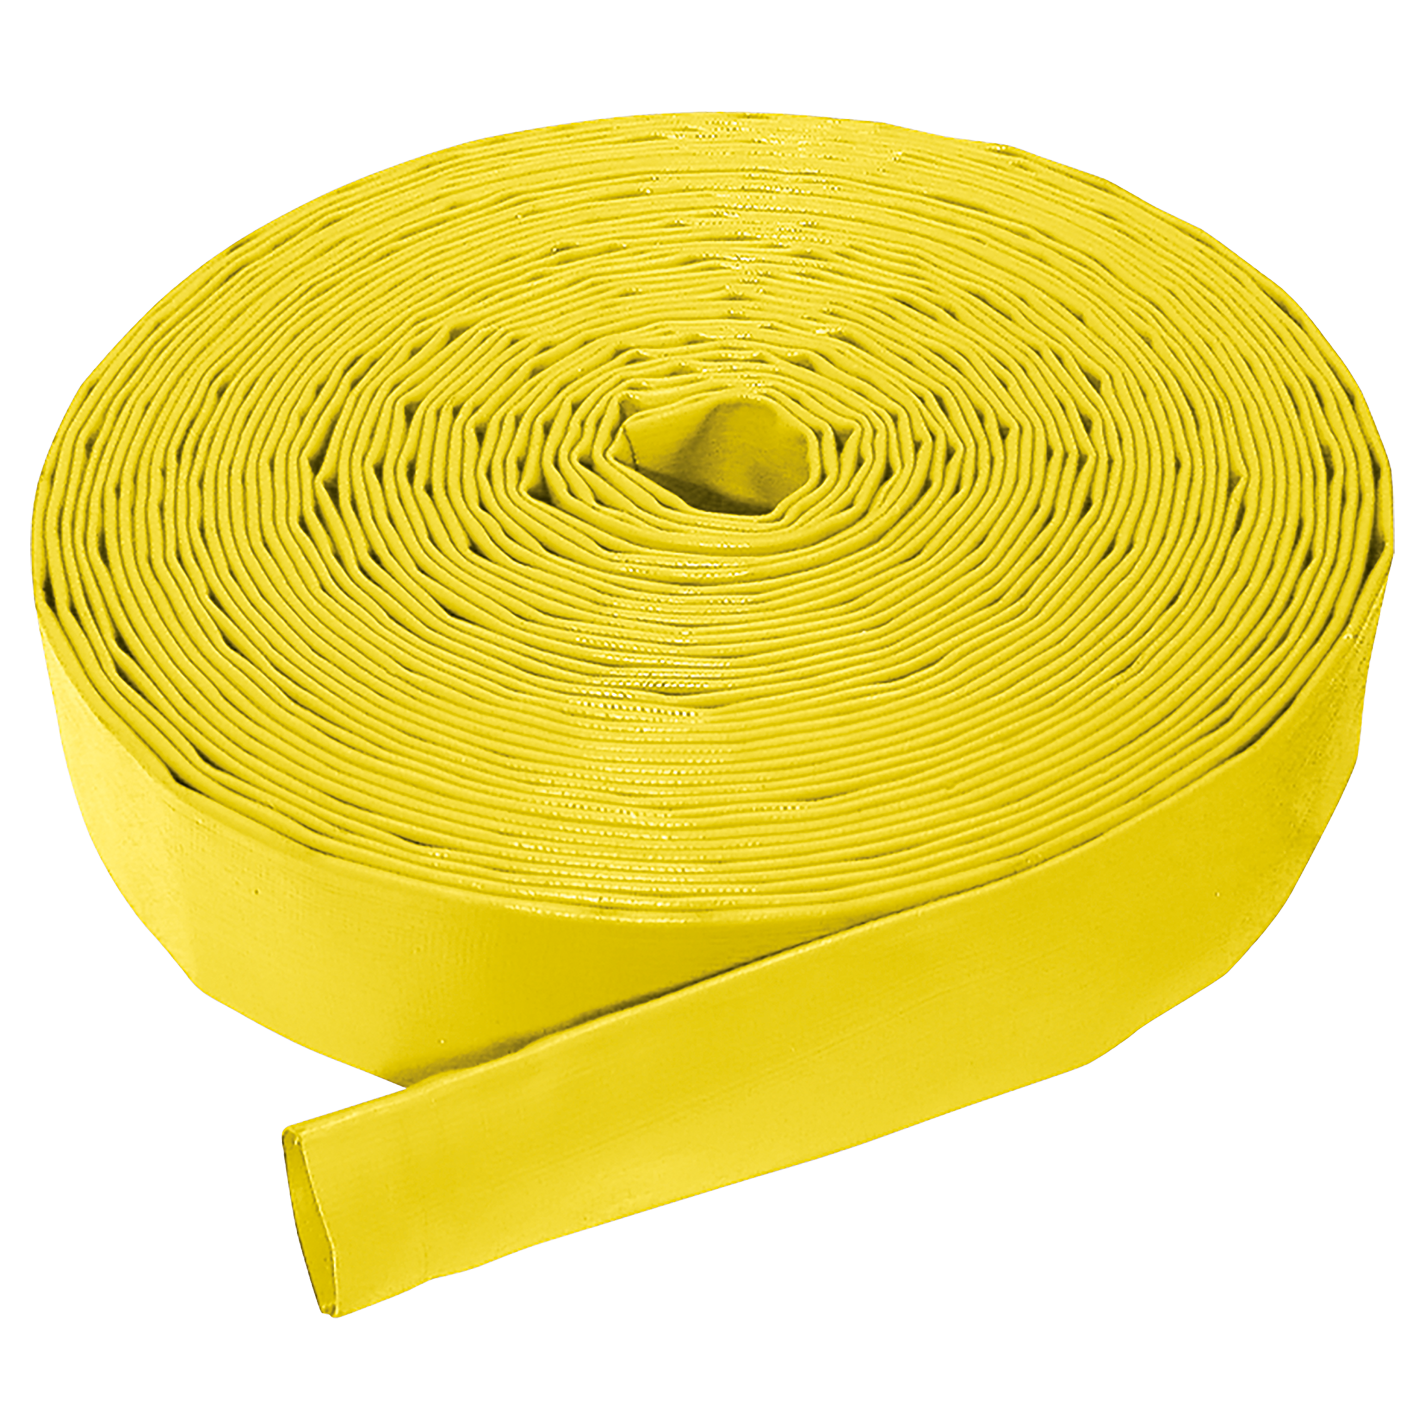 2" ID YELLOW LAY-FLAT HOSE 10M COIL